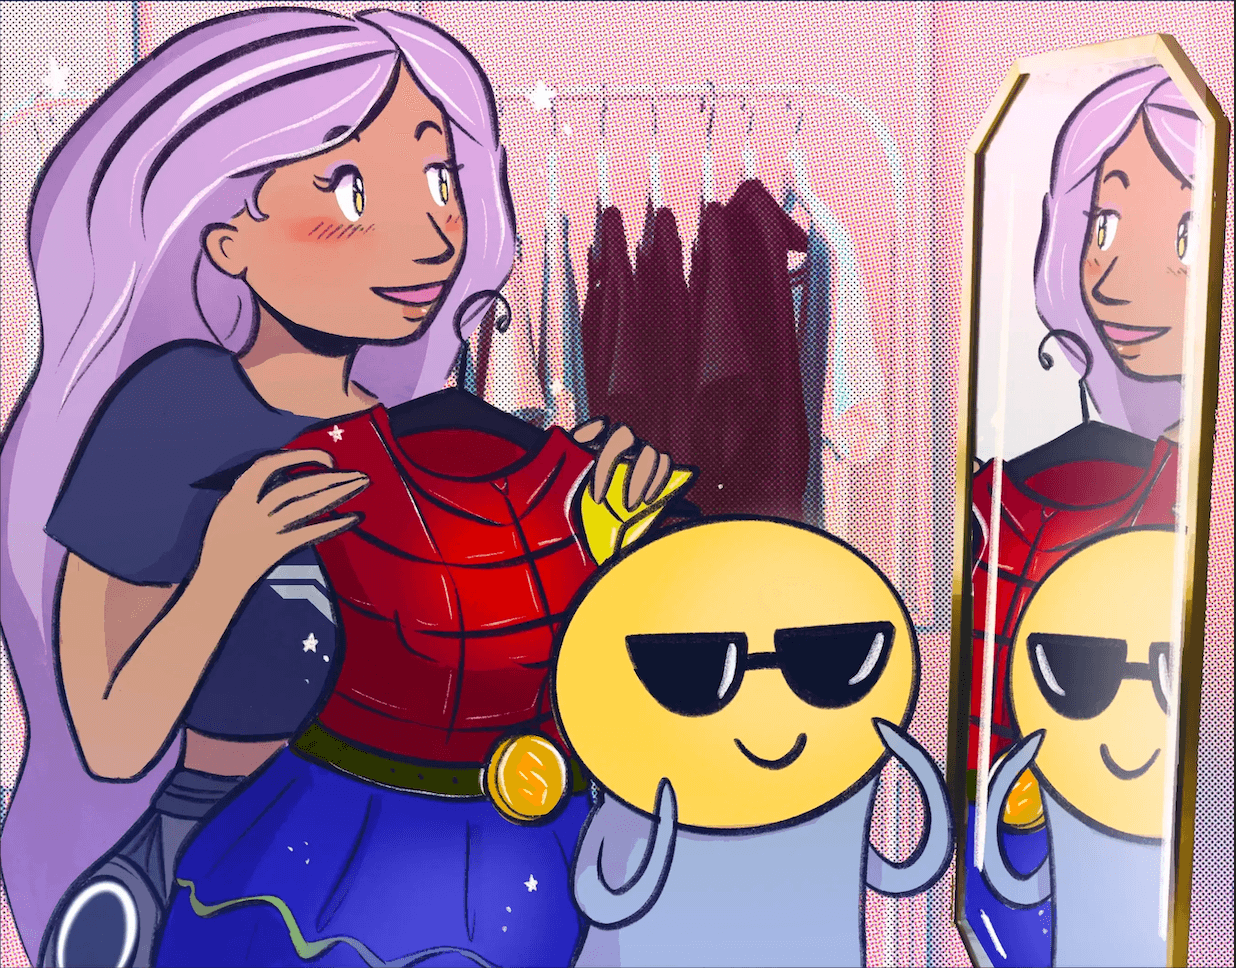 Sophia Bot and Shocky from SoWork's remote team trying on different outfits